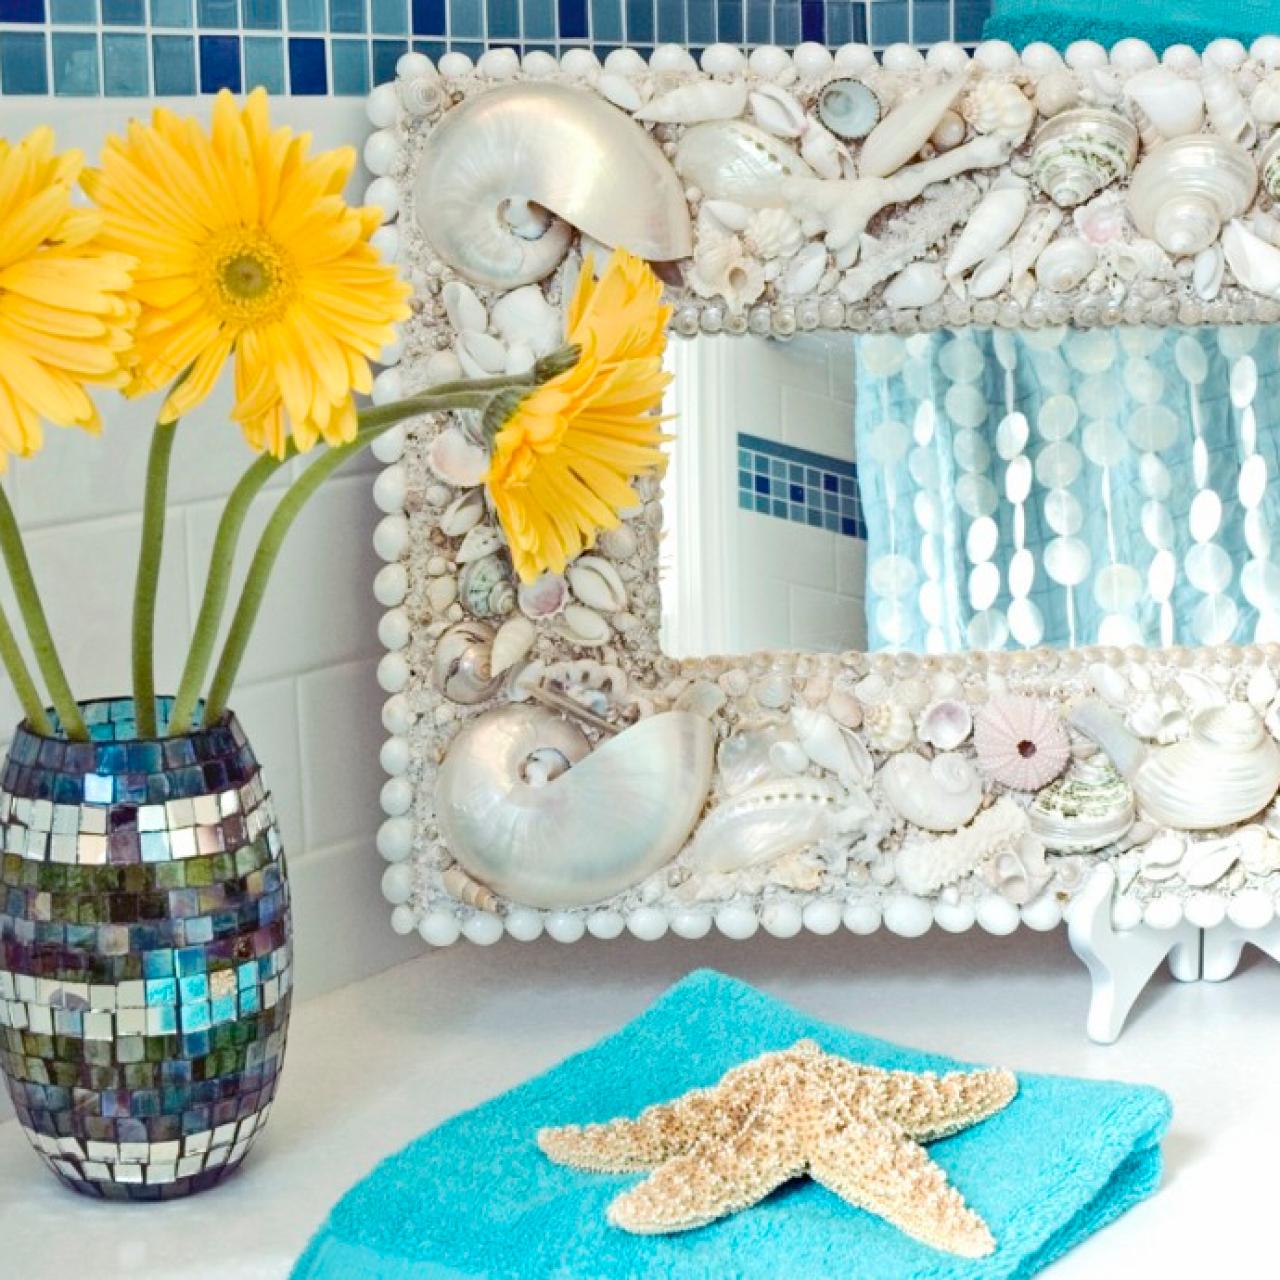 Seashell Bathroom Decor Ideas: Pictures & Tips From HGTV